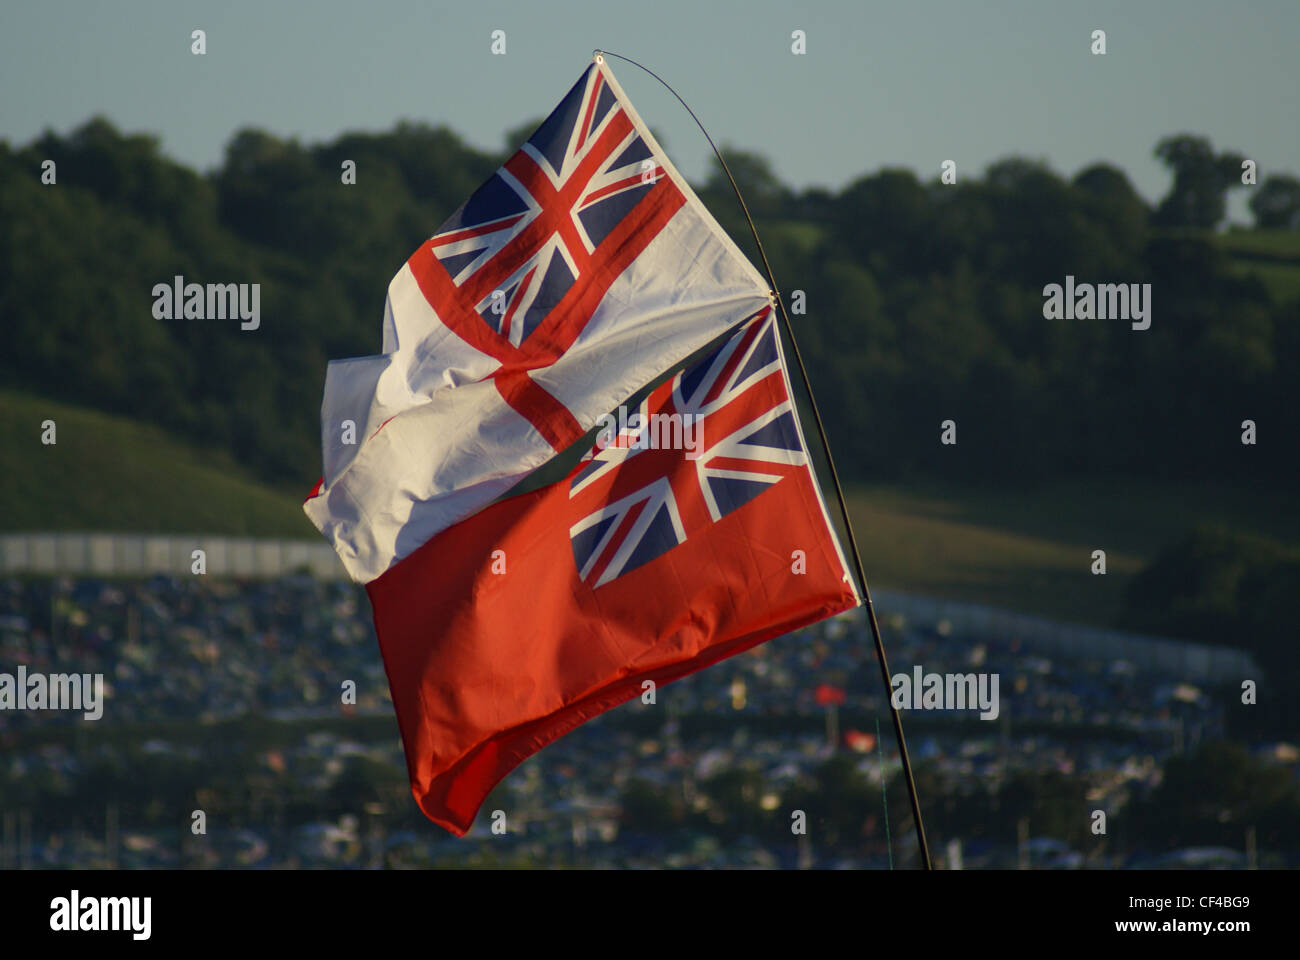 Red Ensign & White Ensign flown at a Music Festival Stock Photo